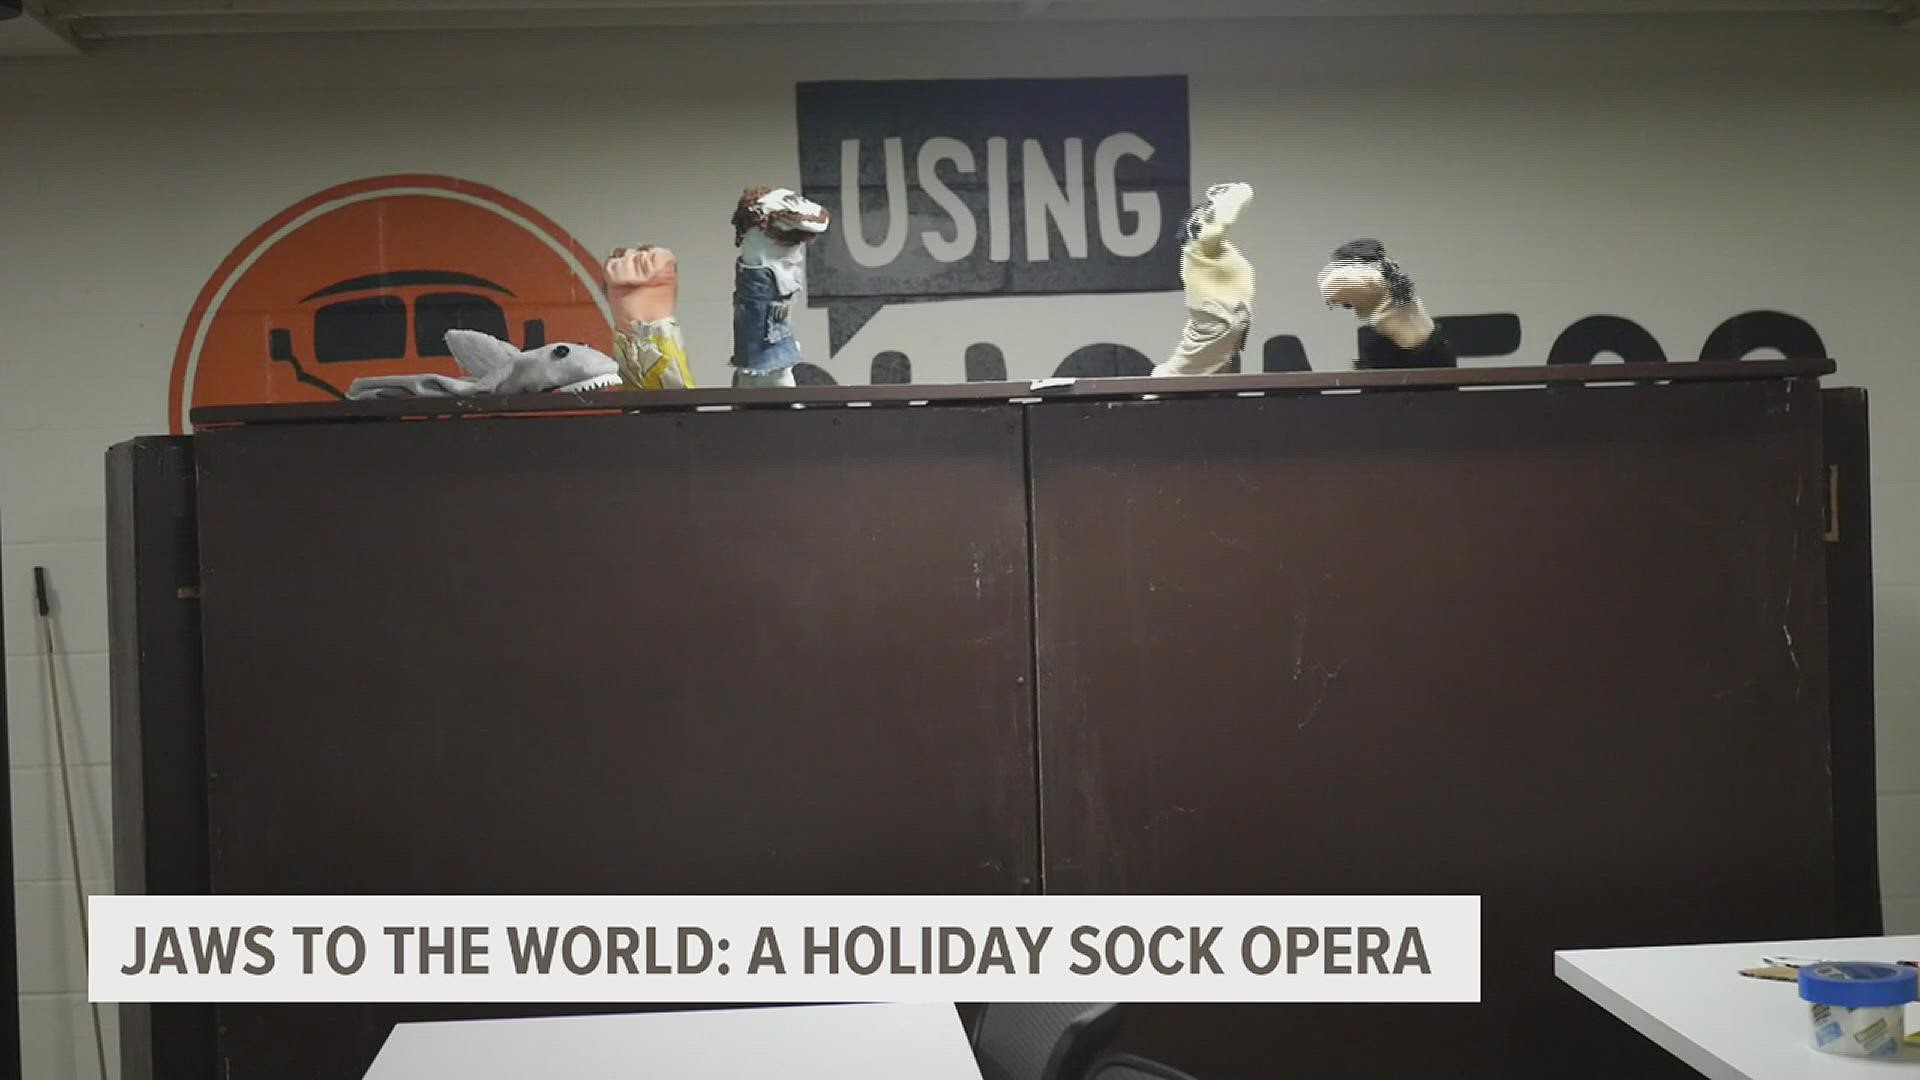 The Creative Works of Lancaster to perform a sock puppet parody of the classic film, "Jaws," with a Holiday twist.